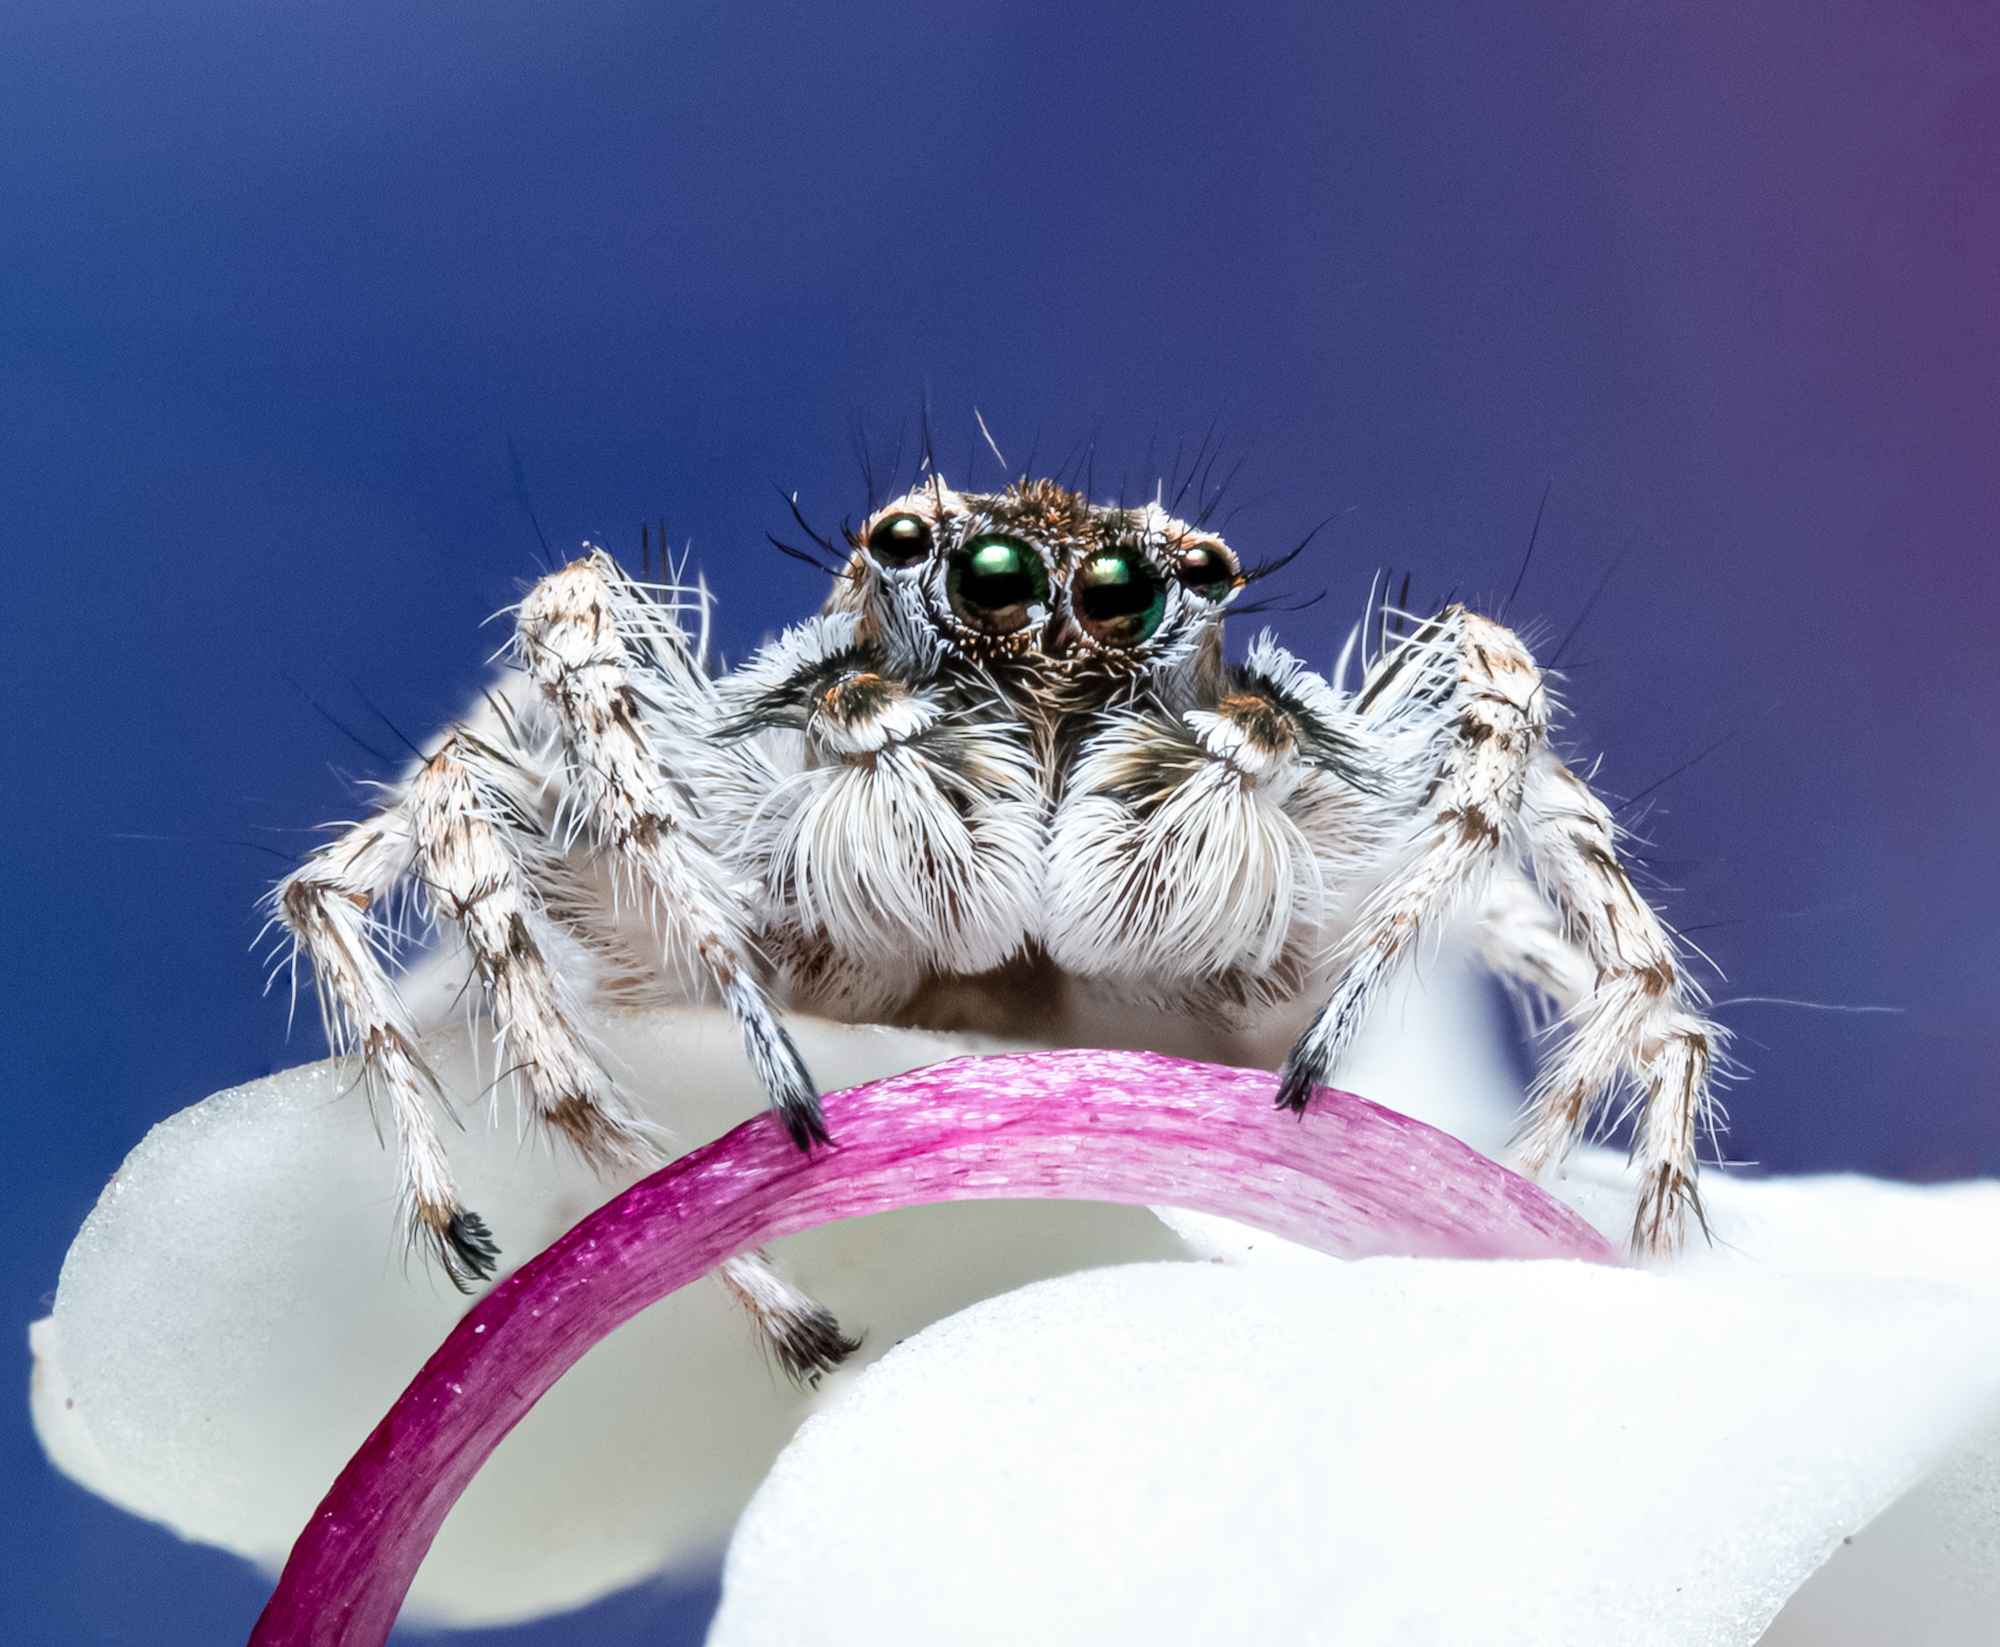 Jumping spider super macrography 